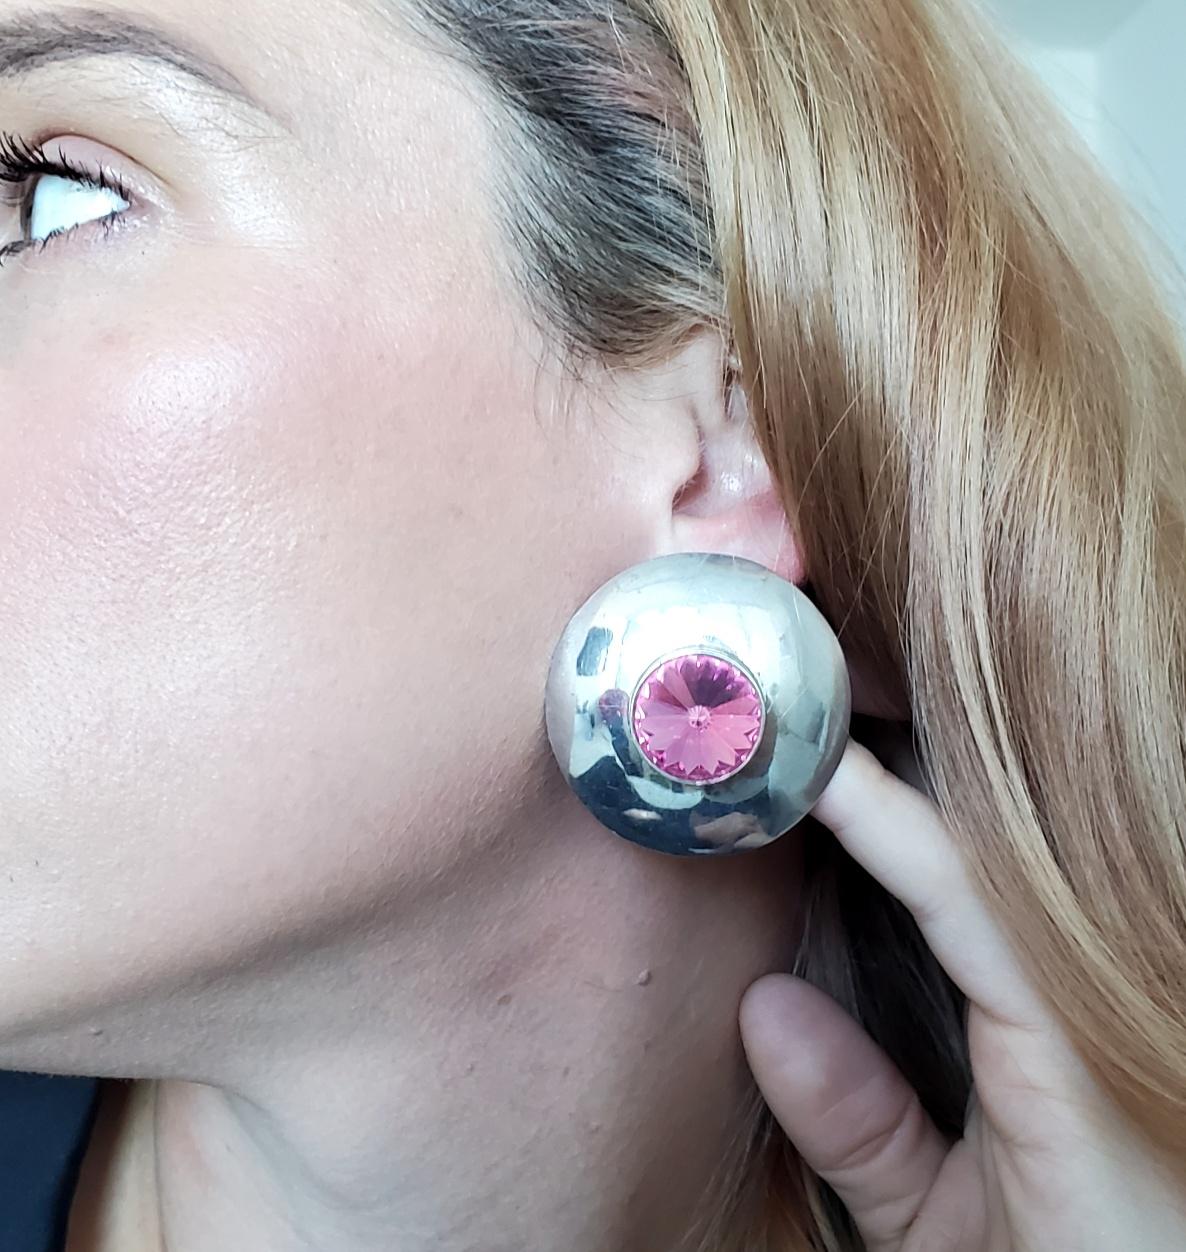 Retro modernist Earrings In Sterling Silver designed by the Atelier Alicia.

Beautiful psychedelic pair of earrings, created in Taxco Mexico back in the 1970. This colorful stylish pair is surely a one of a kind piece, designed with retro-modernist